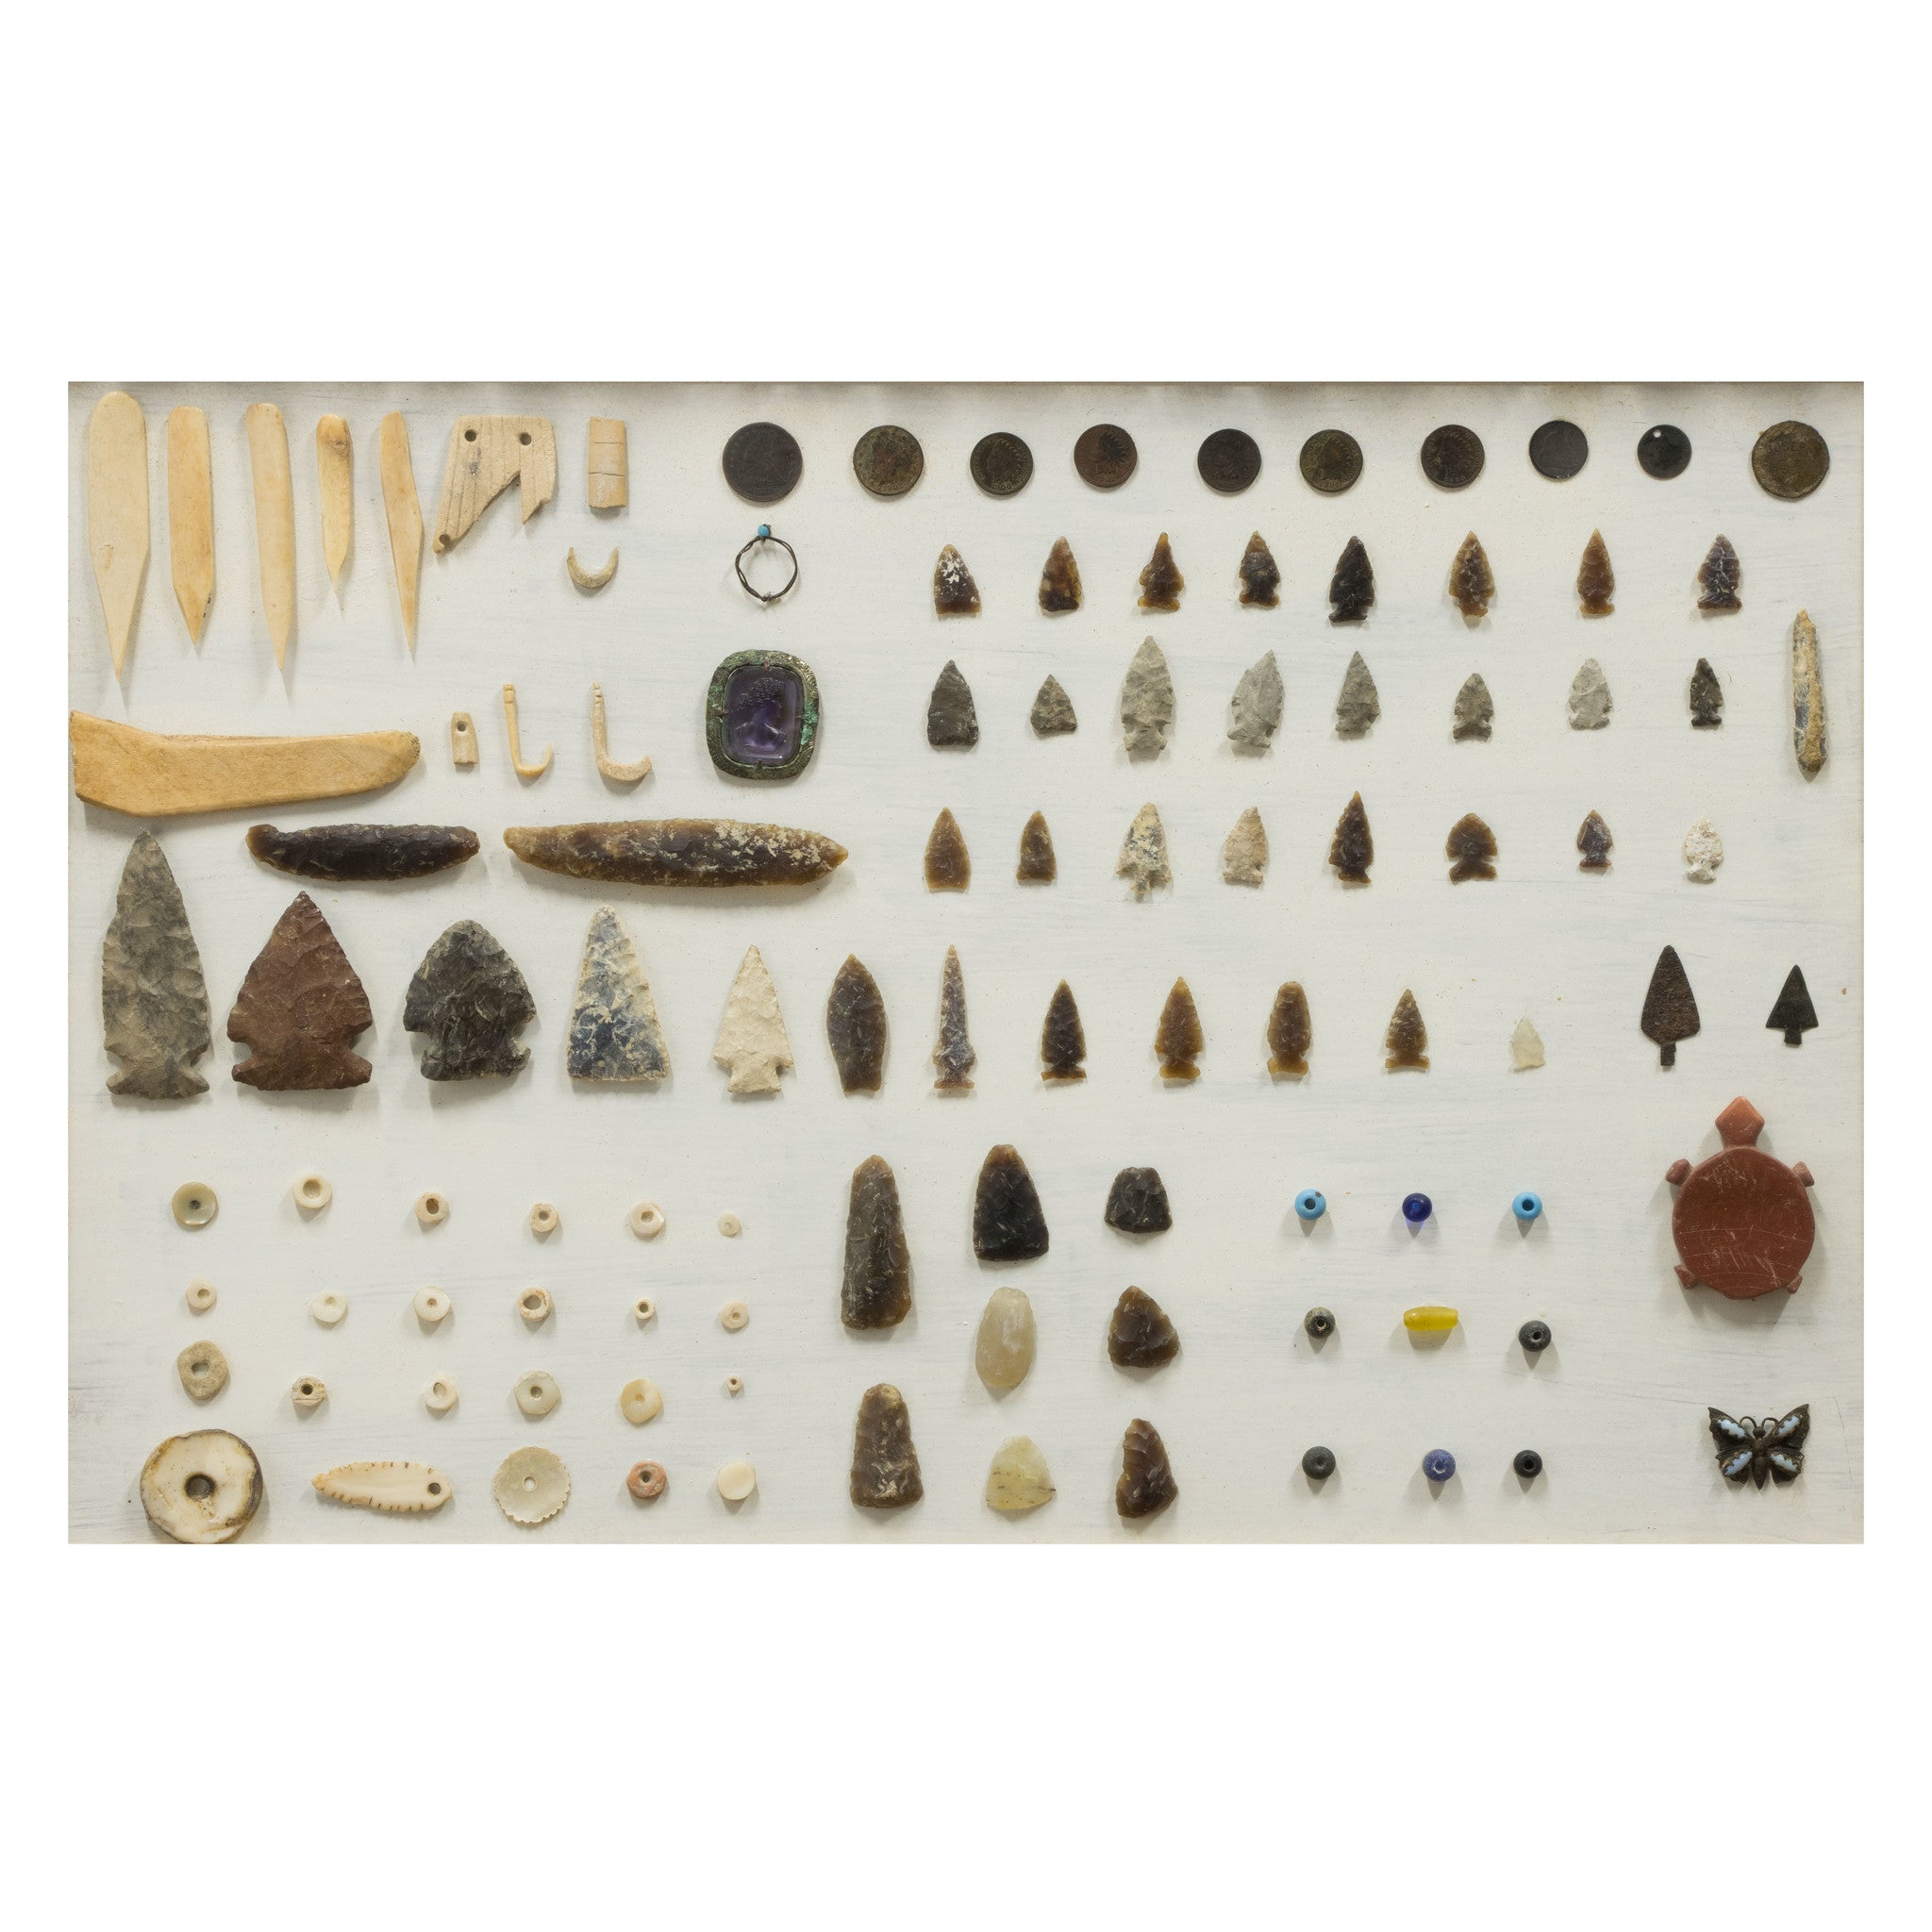 The Haven's Site - Archeological Finds Collection